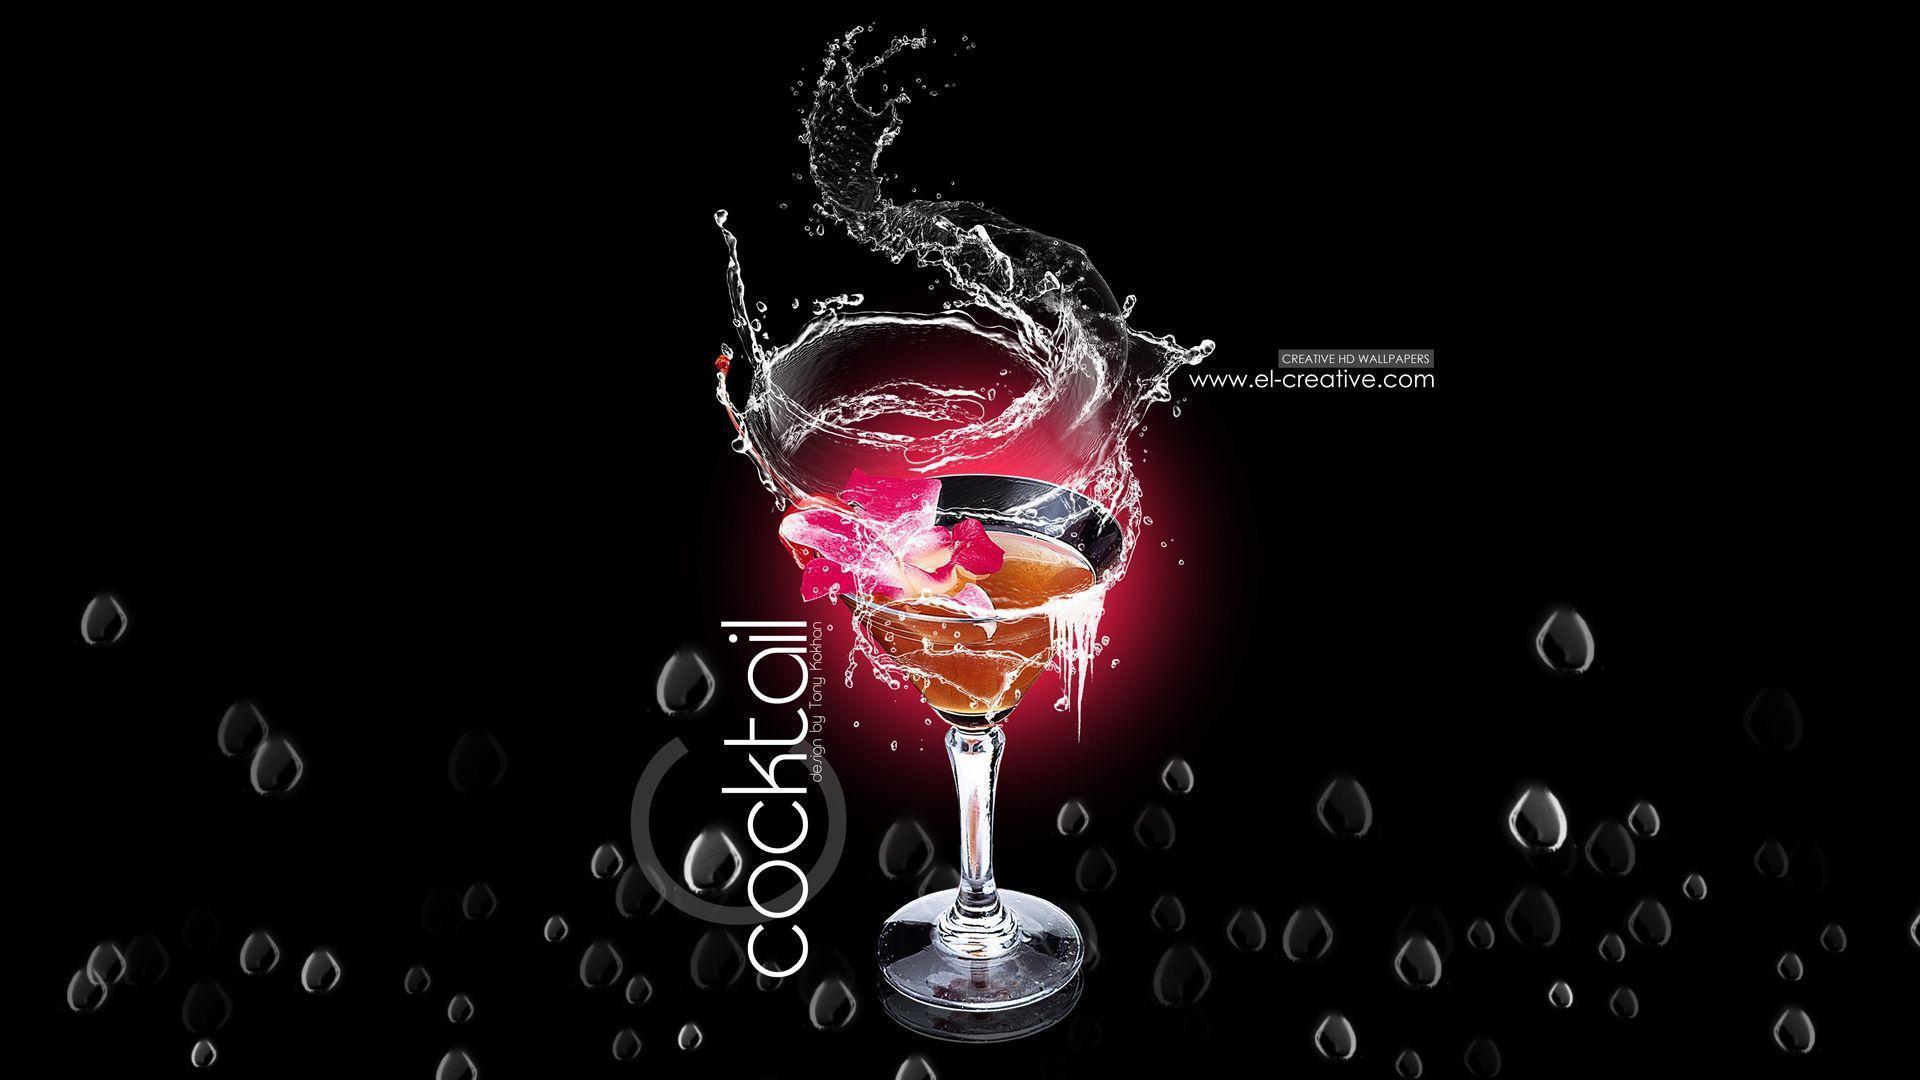 Best image about Cocktail. Black background